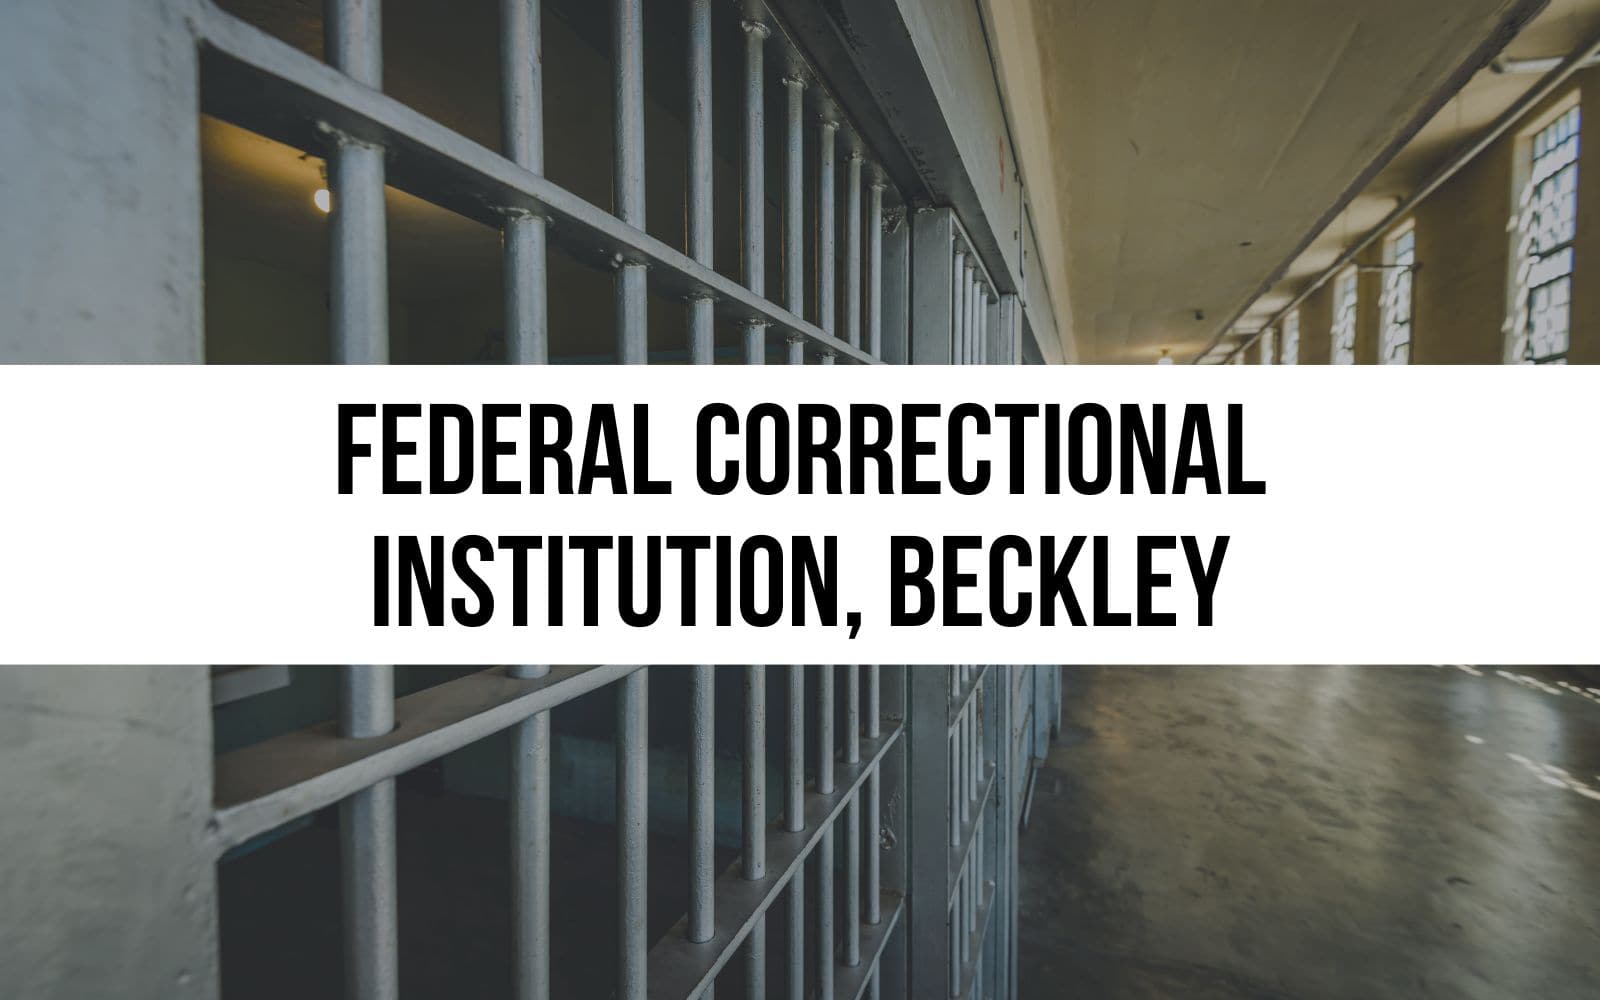 Federal Correctional Institution Beckley